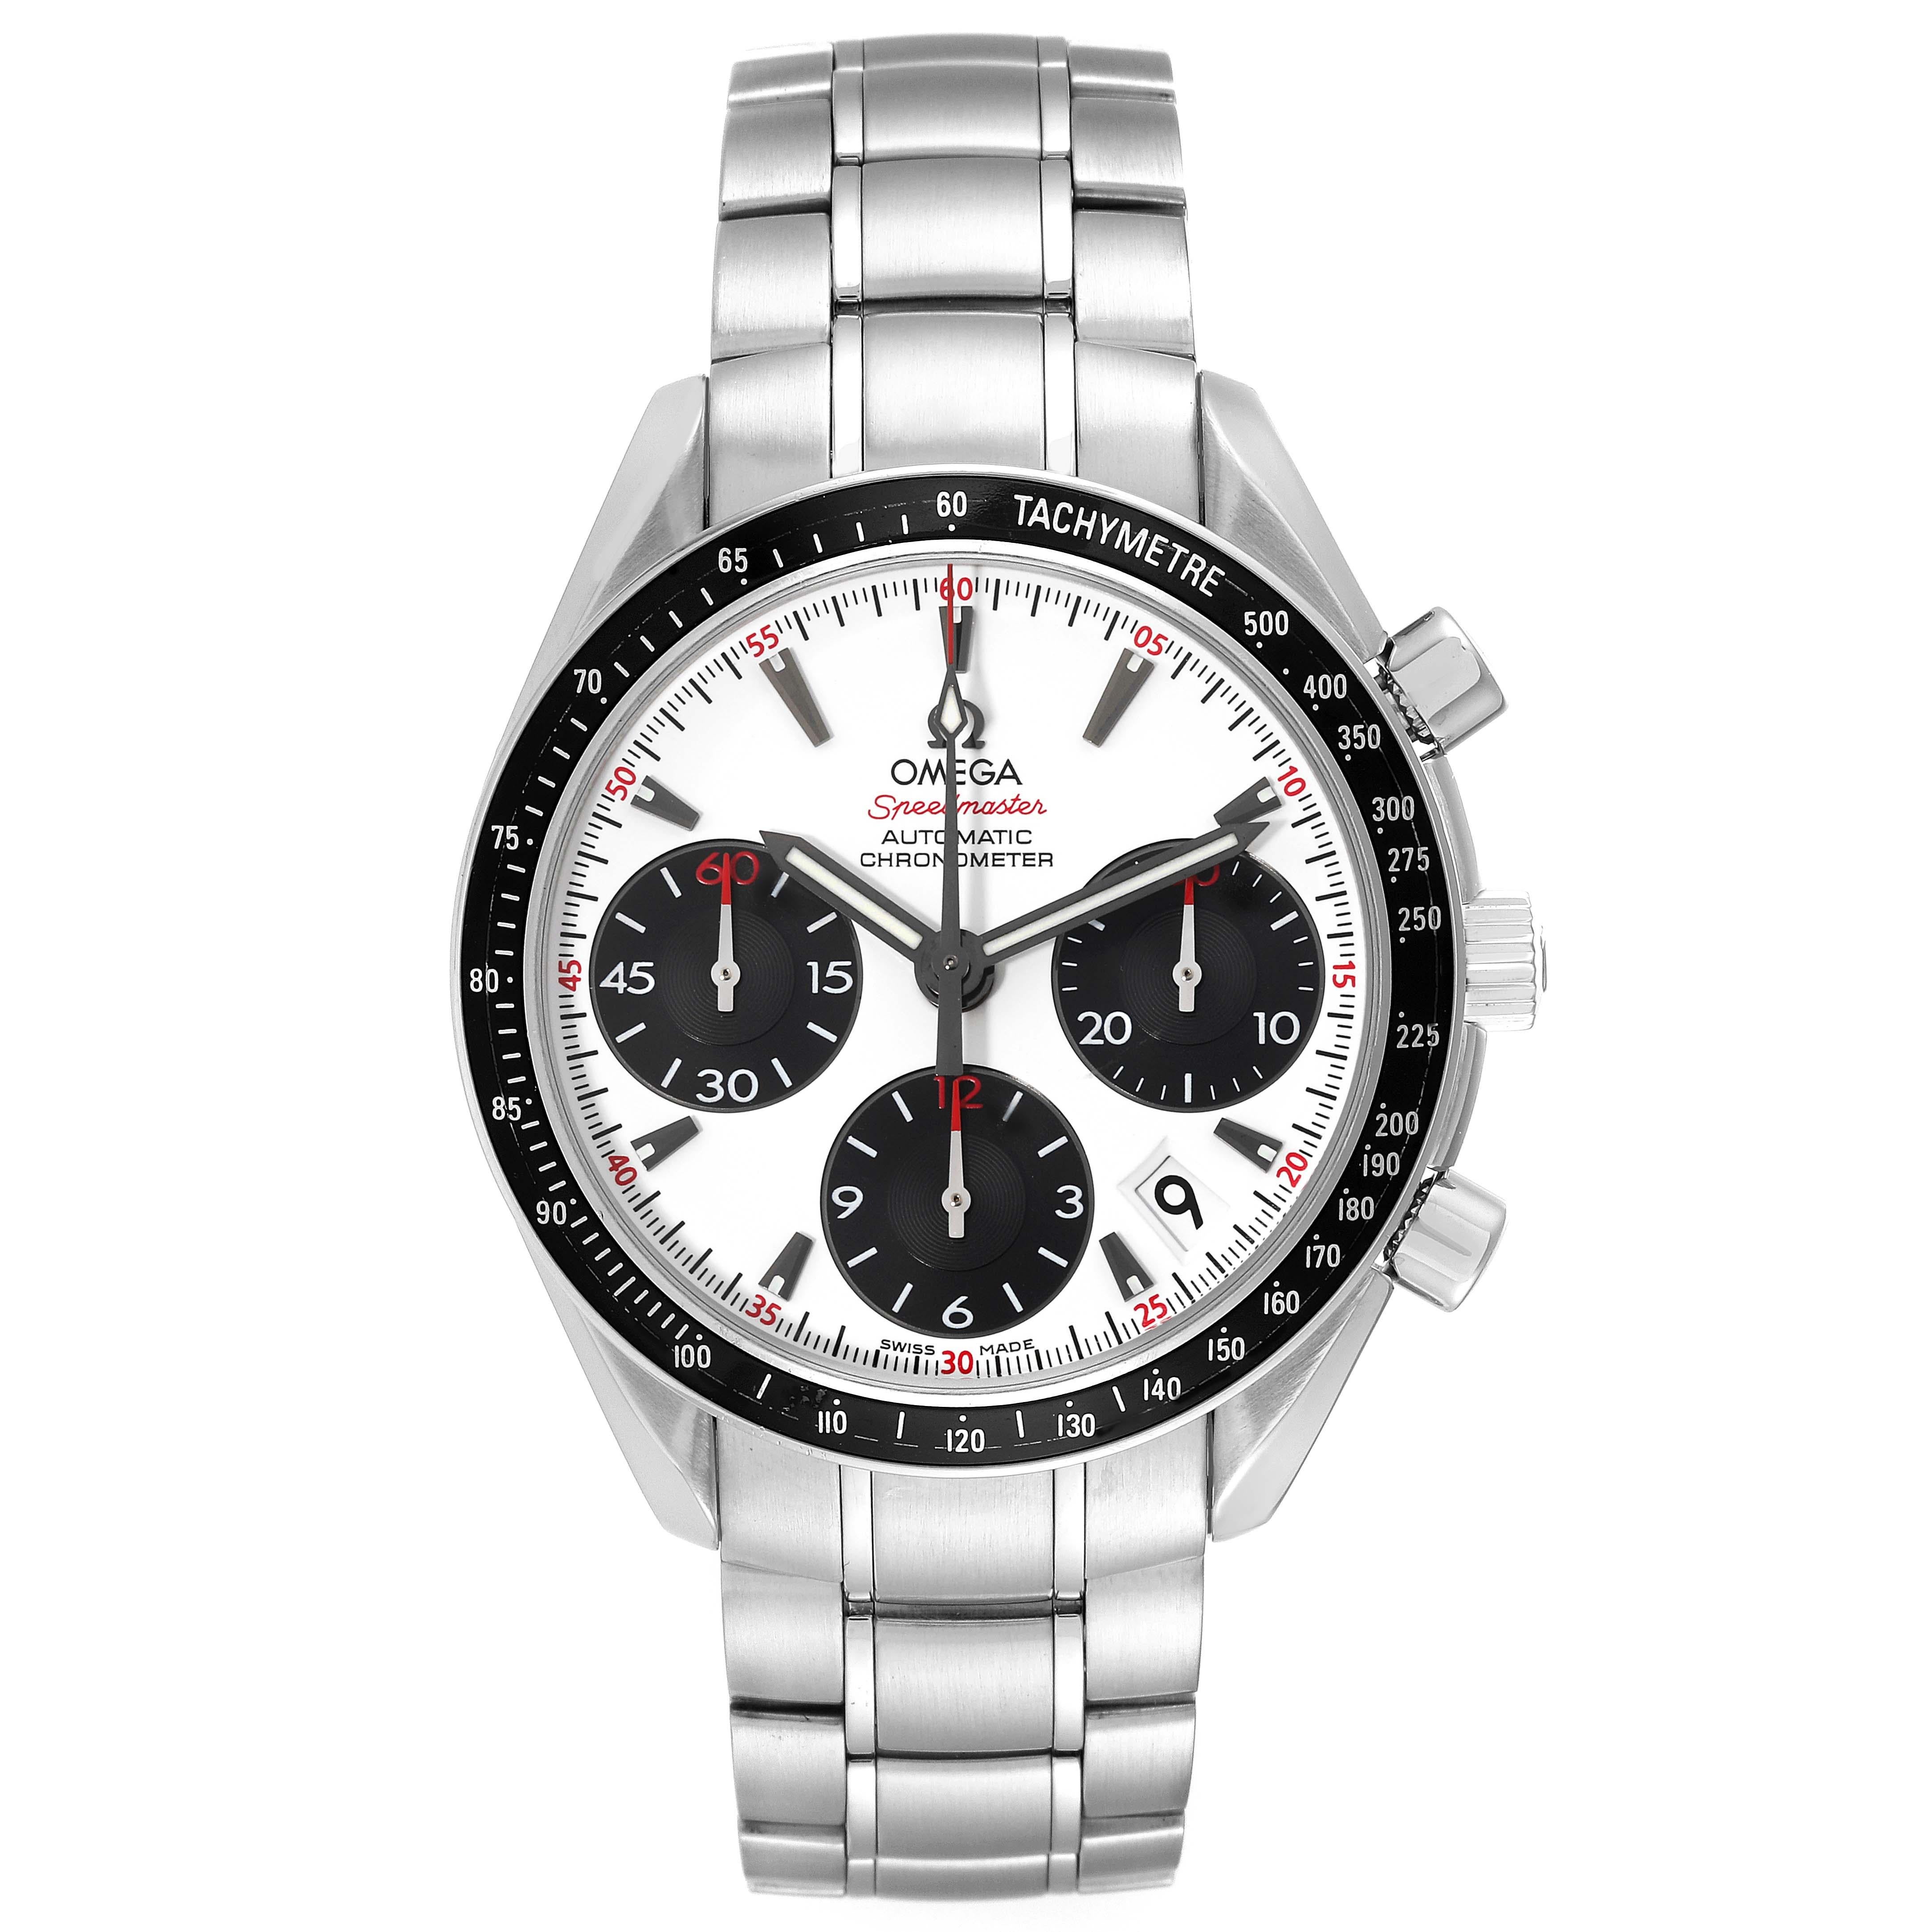 Omega Speedmaster Date Panda Dial Steel Mens Watch 323.30.40.40.04.001 Card. COSC-certified Omega automatic chronograph movement. Caliber 3304. Stainless steel round case 40.0 mm in diameter with polished bevelled edges, pushers and crown. Black